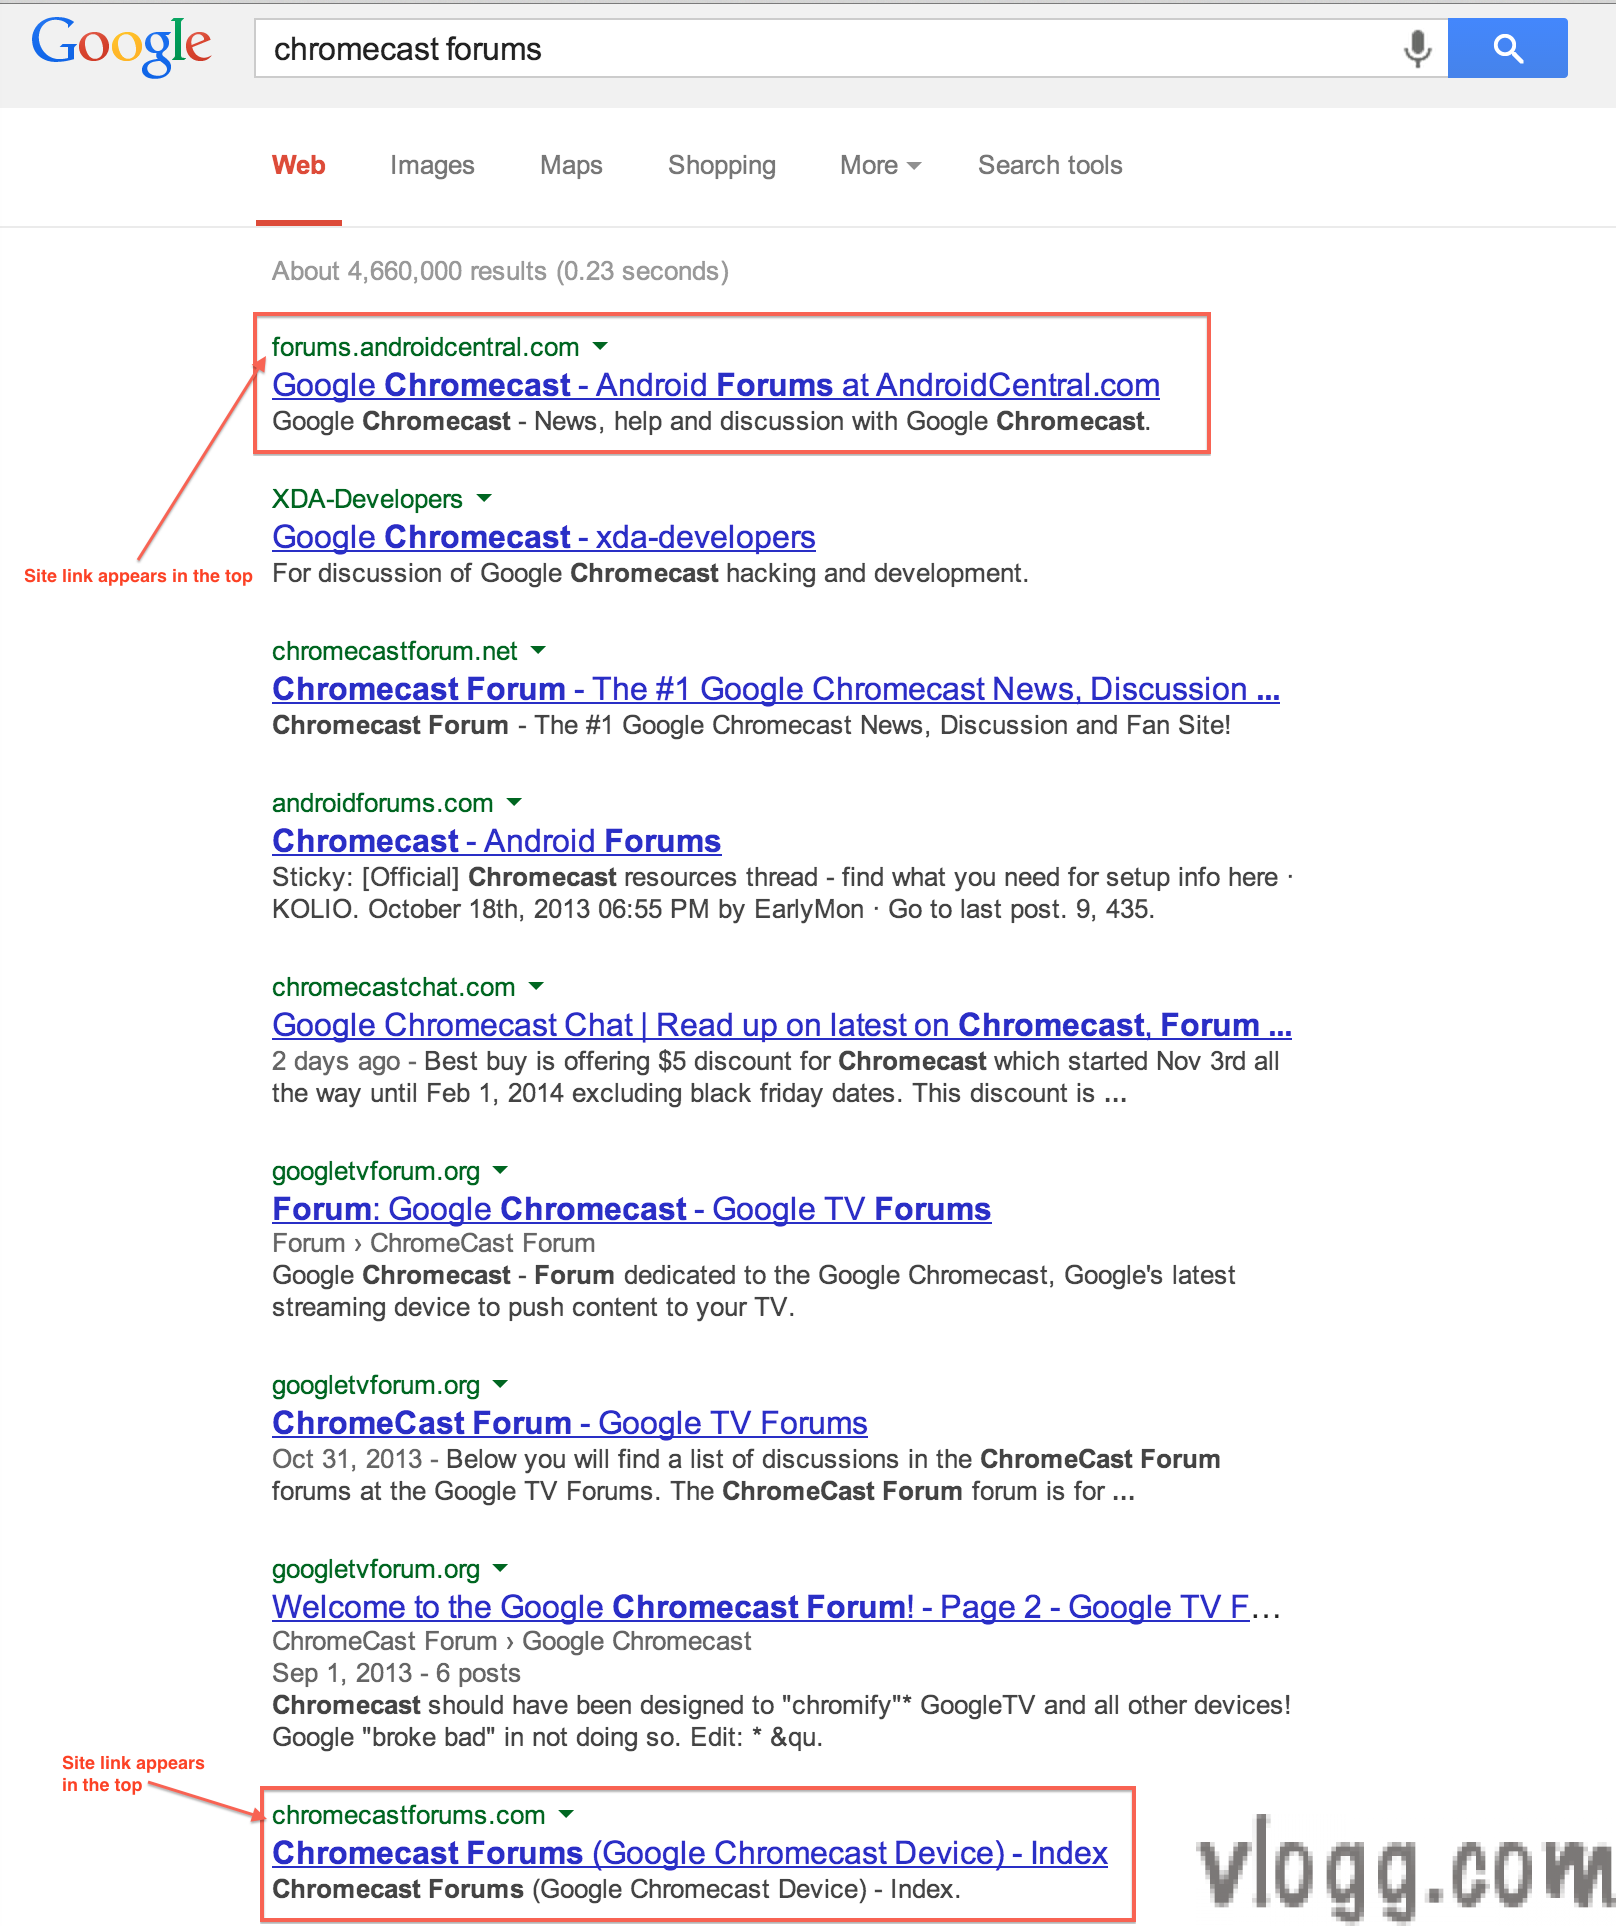 Spotted: Google Trying Search Results With Sitelinks in Top?